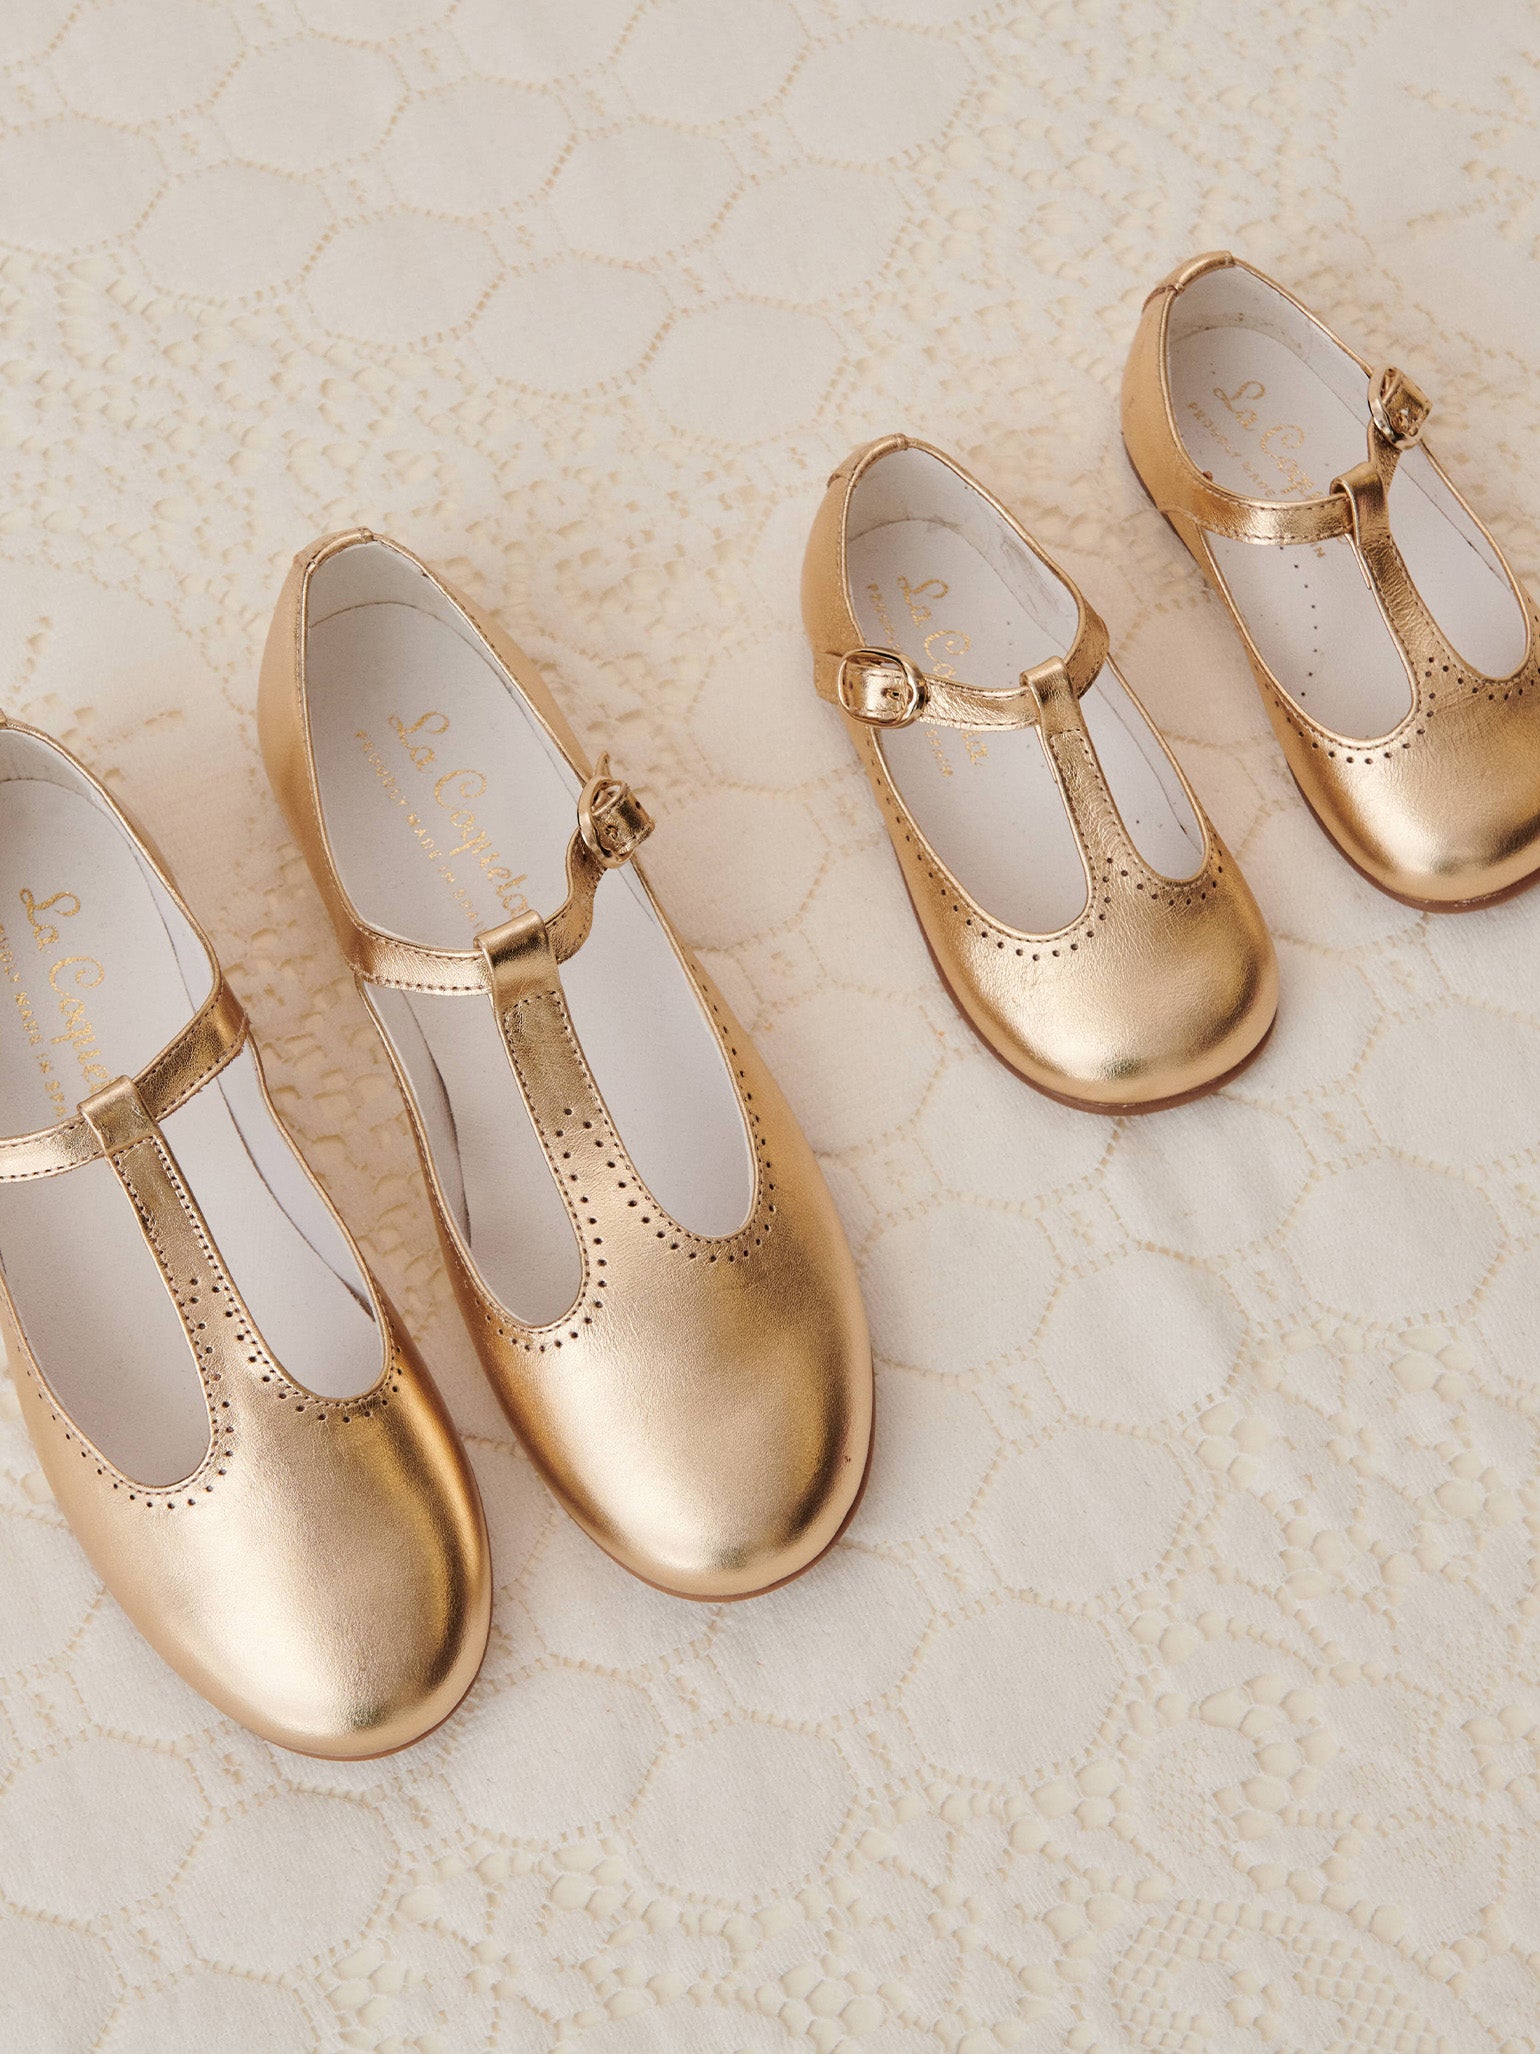 Gold Leather Girl T-Bar Shoes